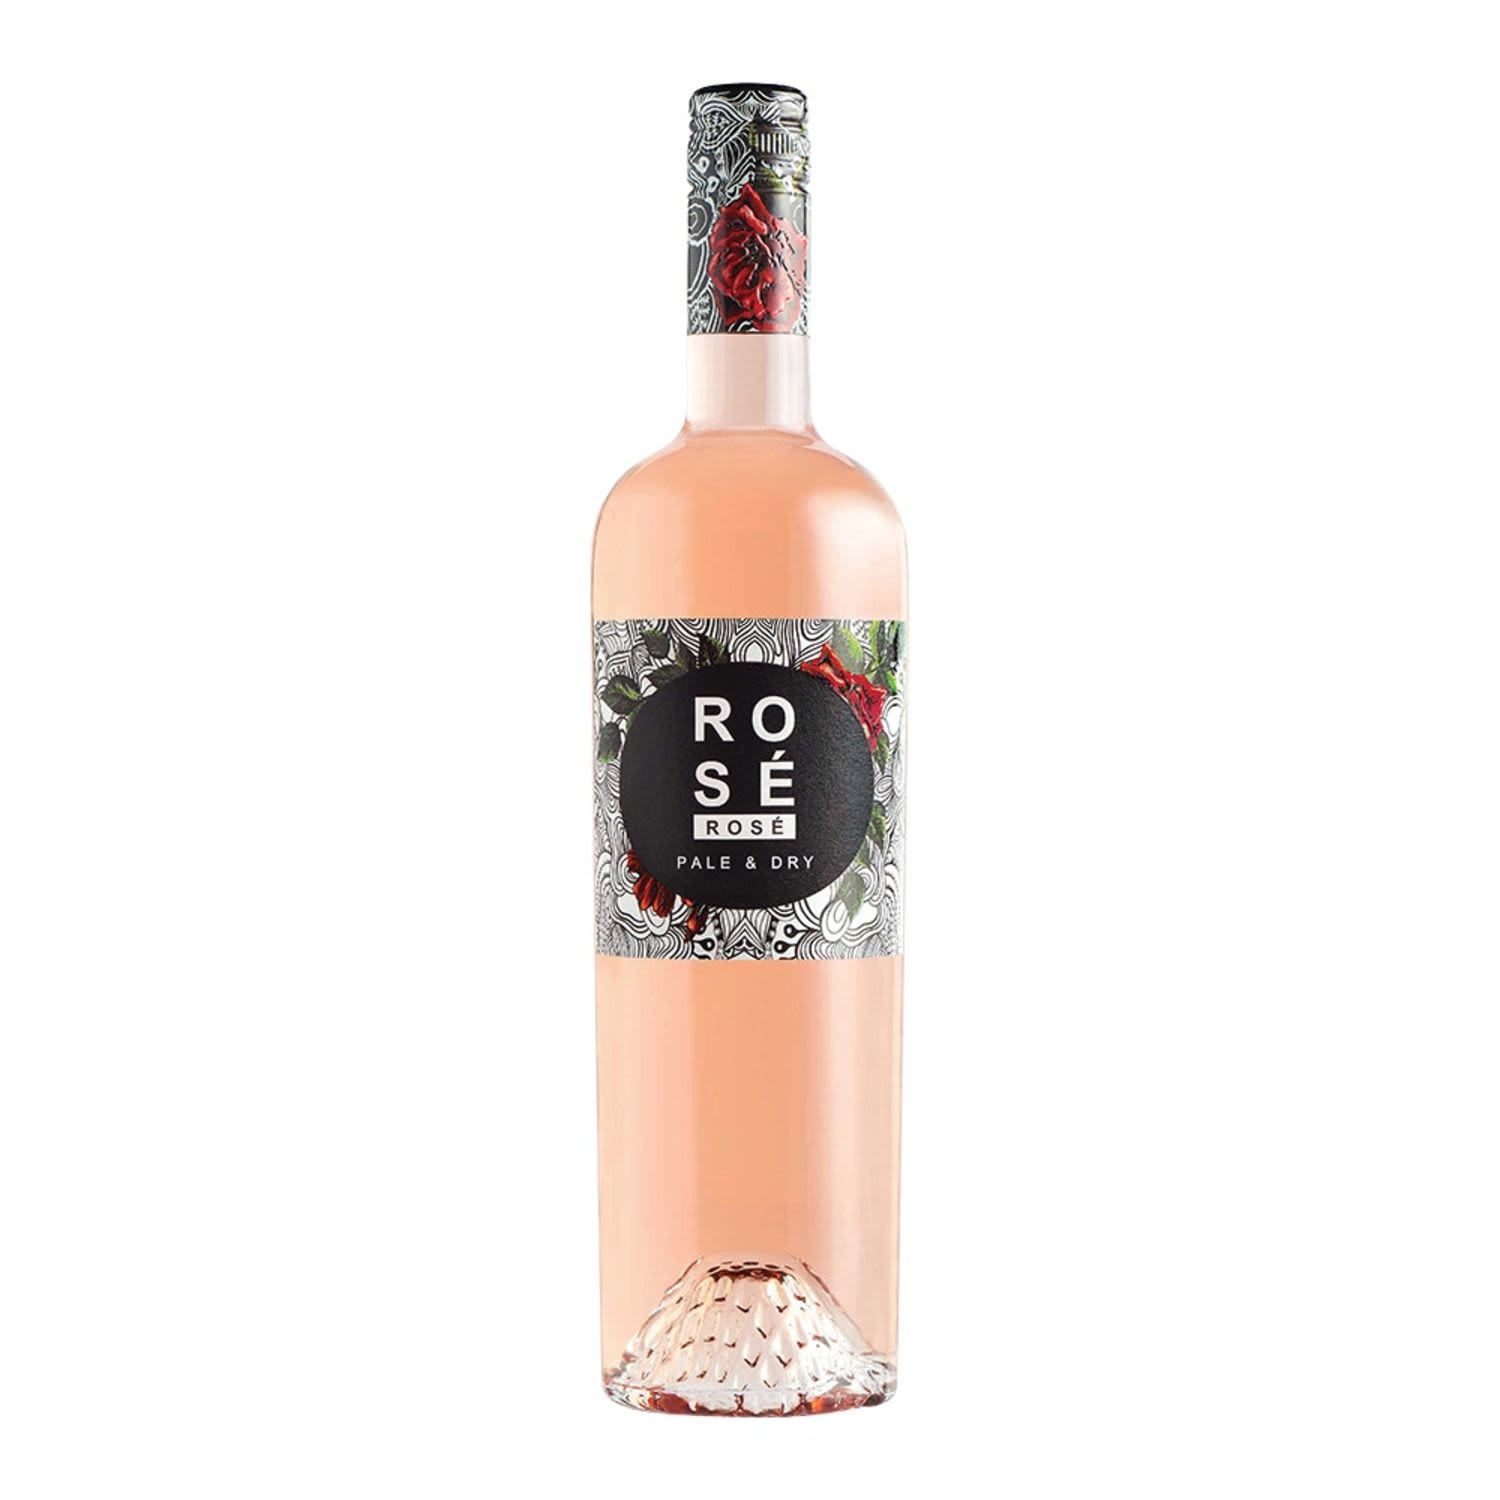 This pale dry Rosé has intense fruit aromas of peach and pomegranate. Everything you want in a dry Rosé - dangerously fresh, generously textured, a touch of spice and brimming with sophistication.<br /> <br />Alcohol Volume: 13.00%<br /><br />Pack Format: Bottle<br /><br />Standard Drinks: 7.7</br /><br />Pack Type: Bottle<br /><br />Country of Origin: Australia<br /><br />Region: Yarra Valley<br /><br />Vintage: Vintages Vary<br />